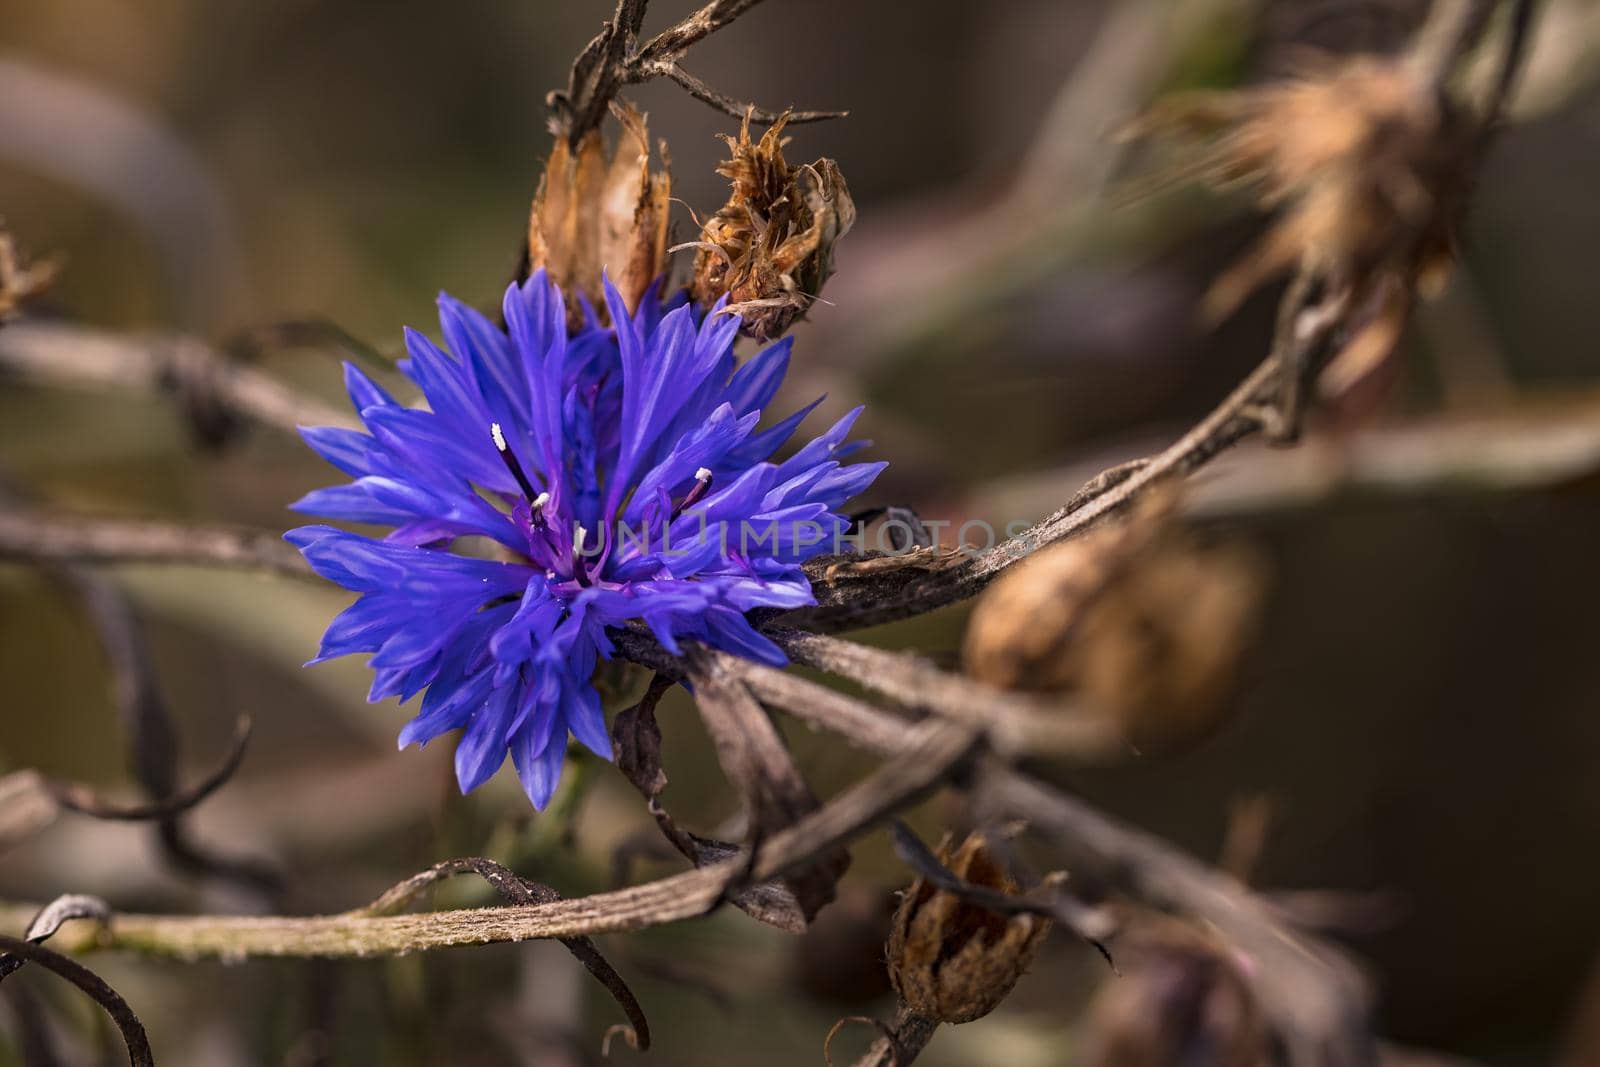 One isolated blue cornflower in front of curved brown leaves and stems, Germany by astrosoft